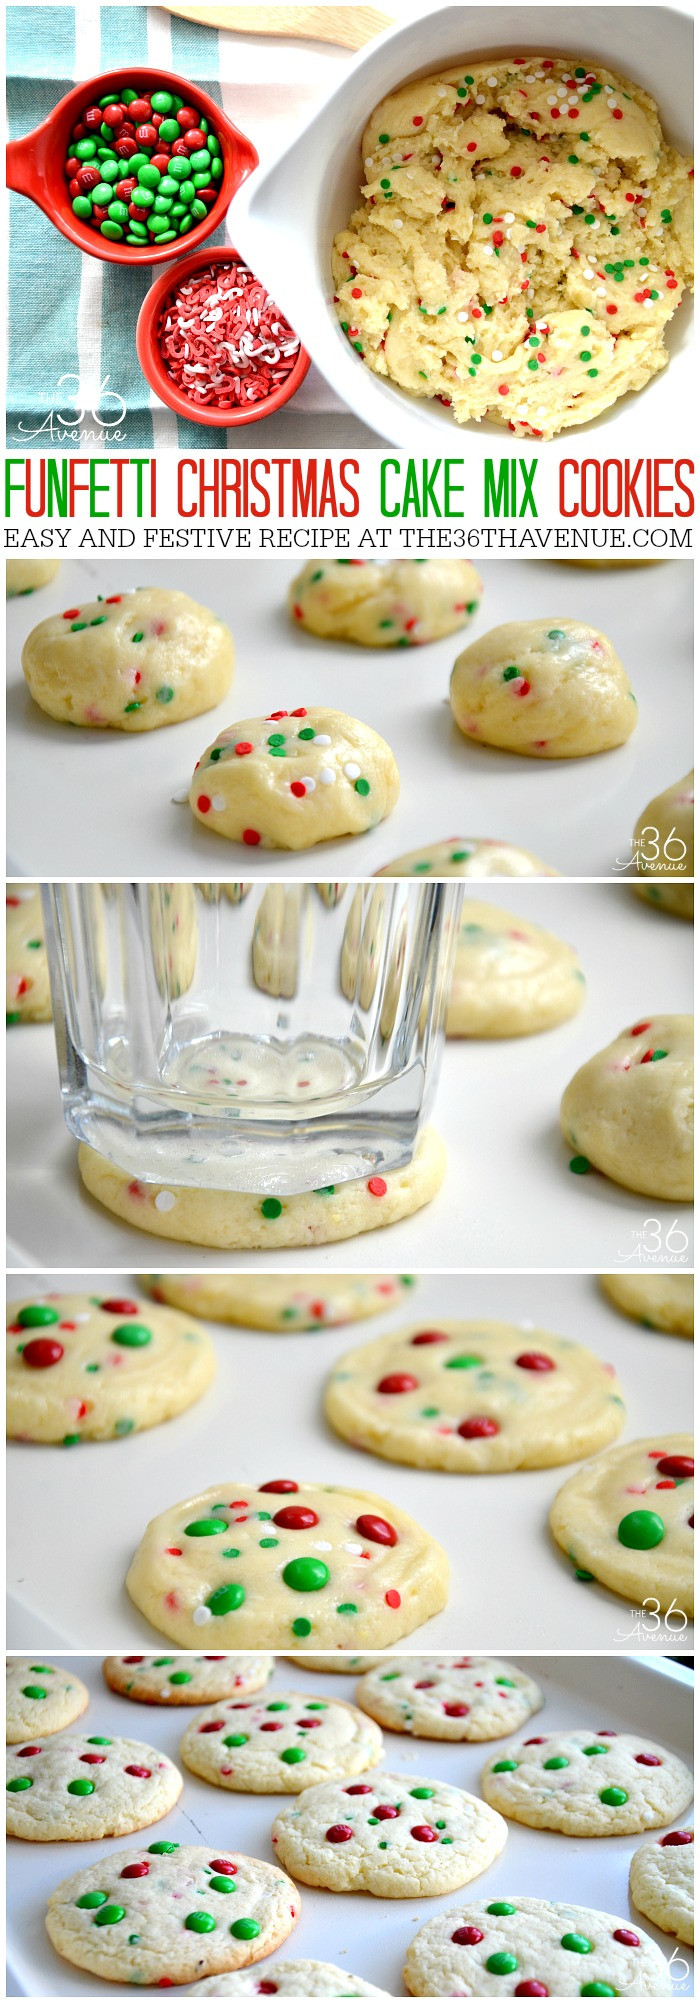 Easy Christmas Cookies Recipe
 Christmas Cookies Easy Christmas Recipes The 36th AVENUE